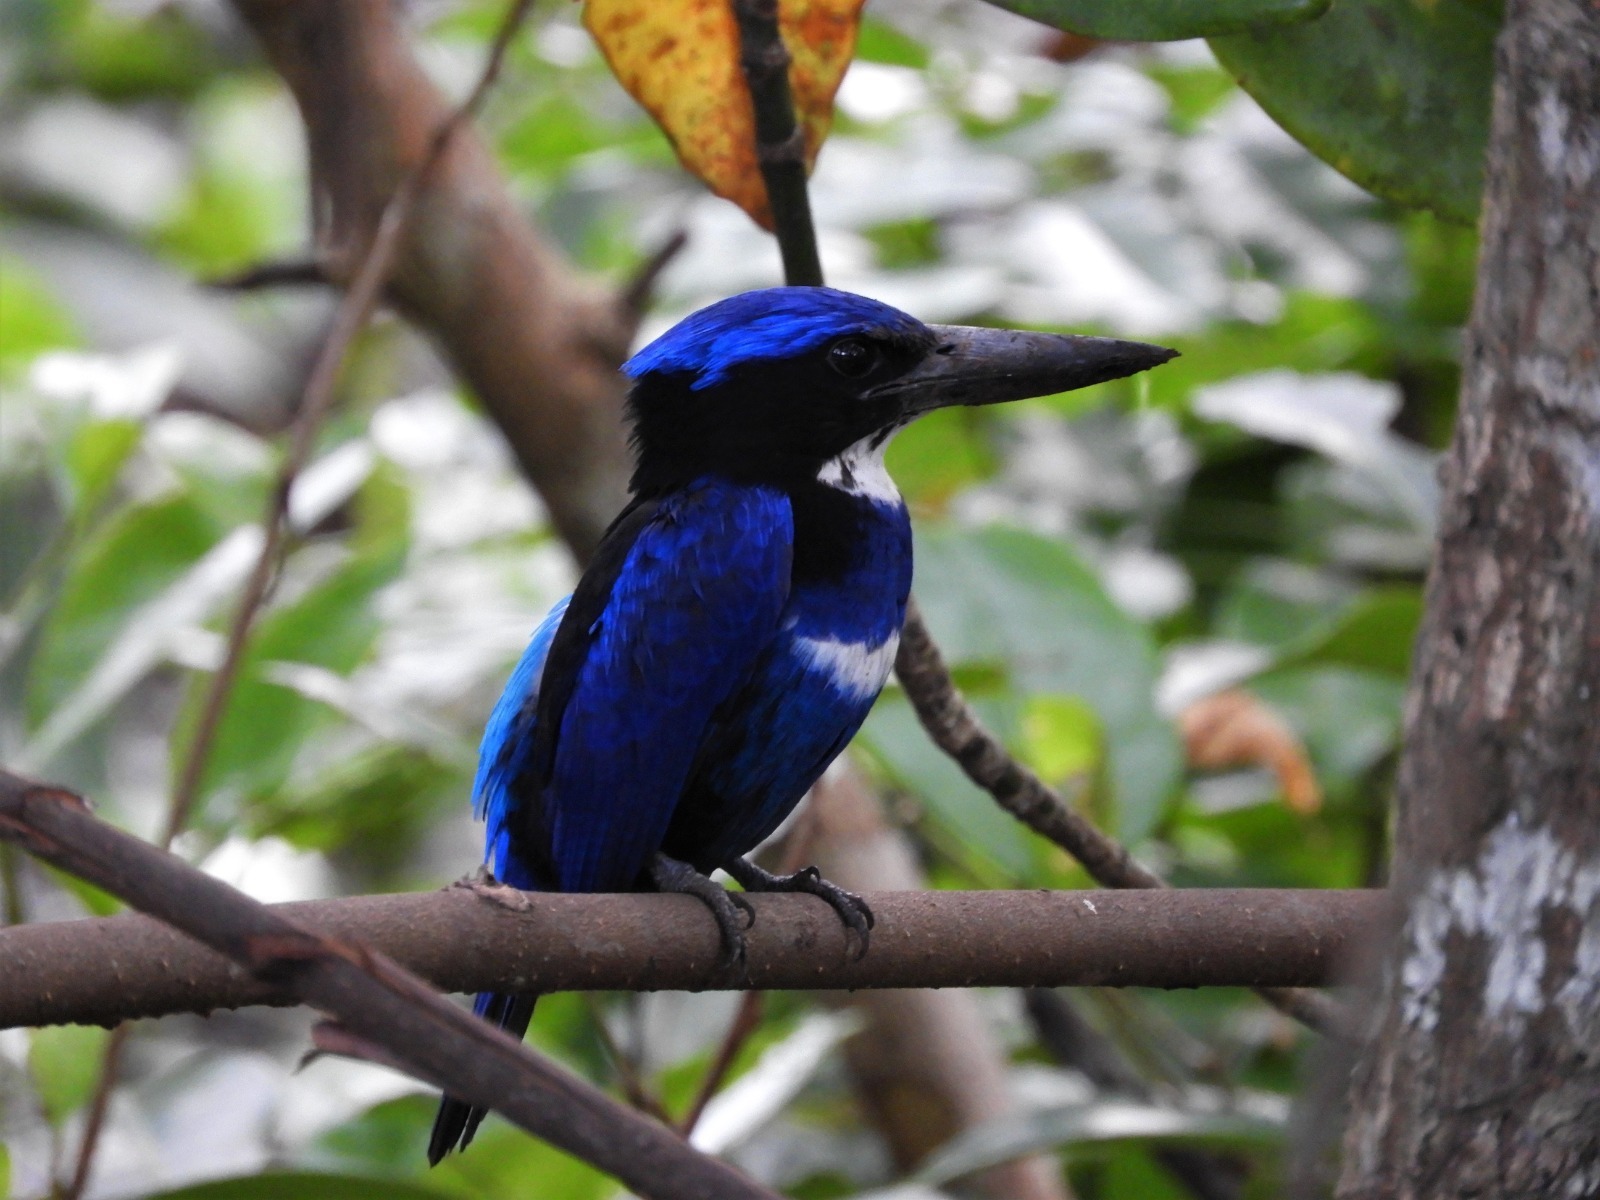 A blue-black kingfisher perched on a branch. The photo shows a dark blue and black bird with a black beak and small patches of white on its chest.